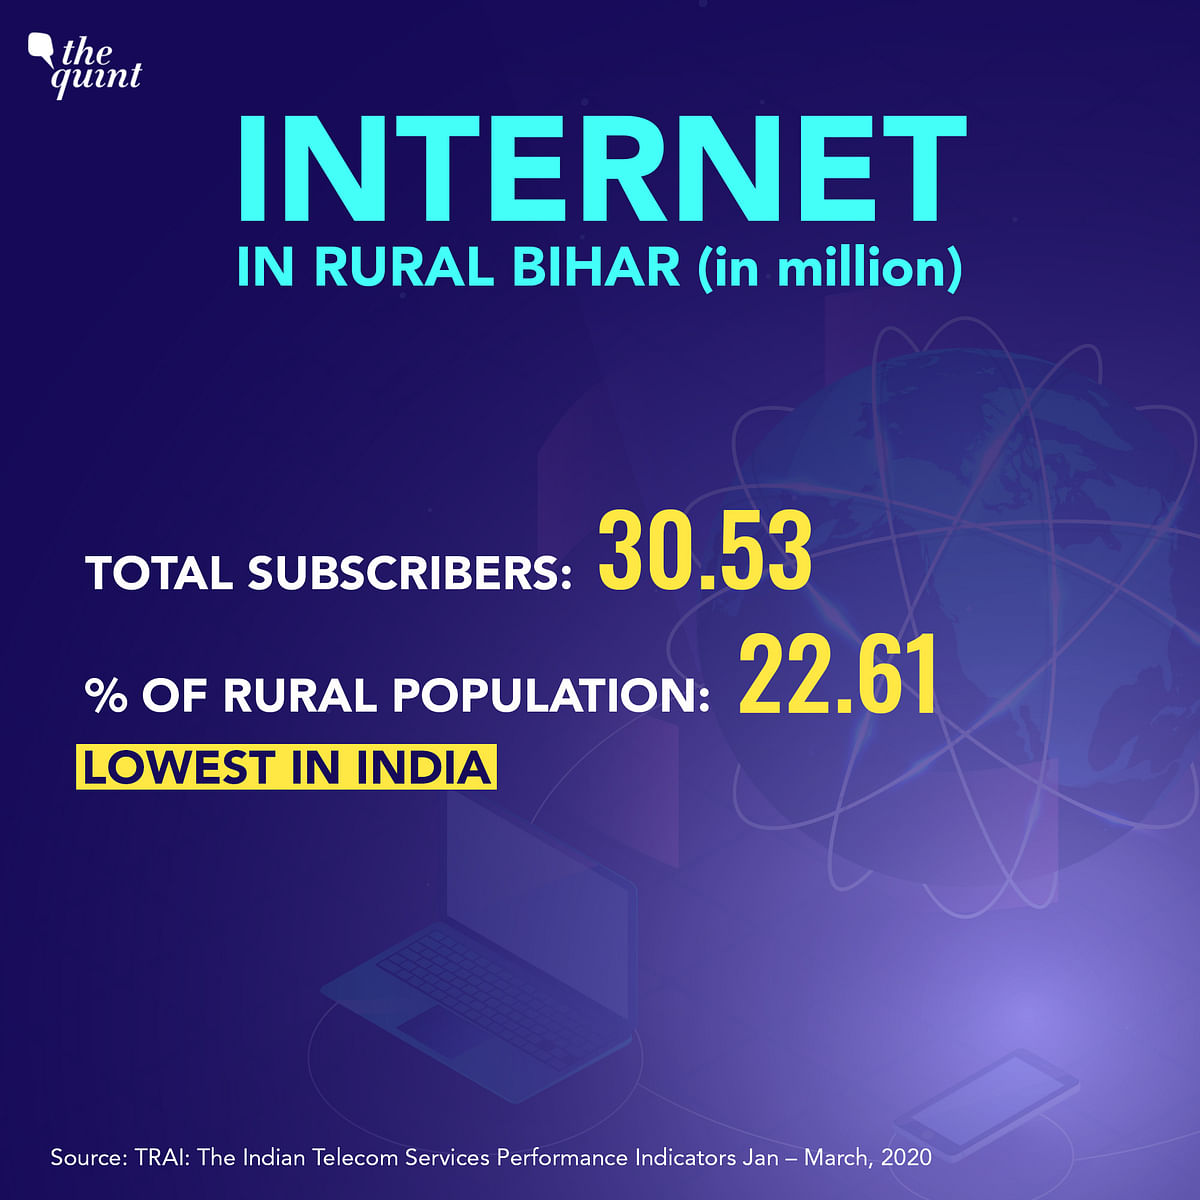 PM Narendra Modi inaugurated a project to connect all 45,945 villages of Bihar with optical fibre internet service.